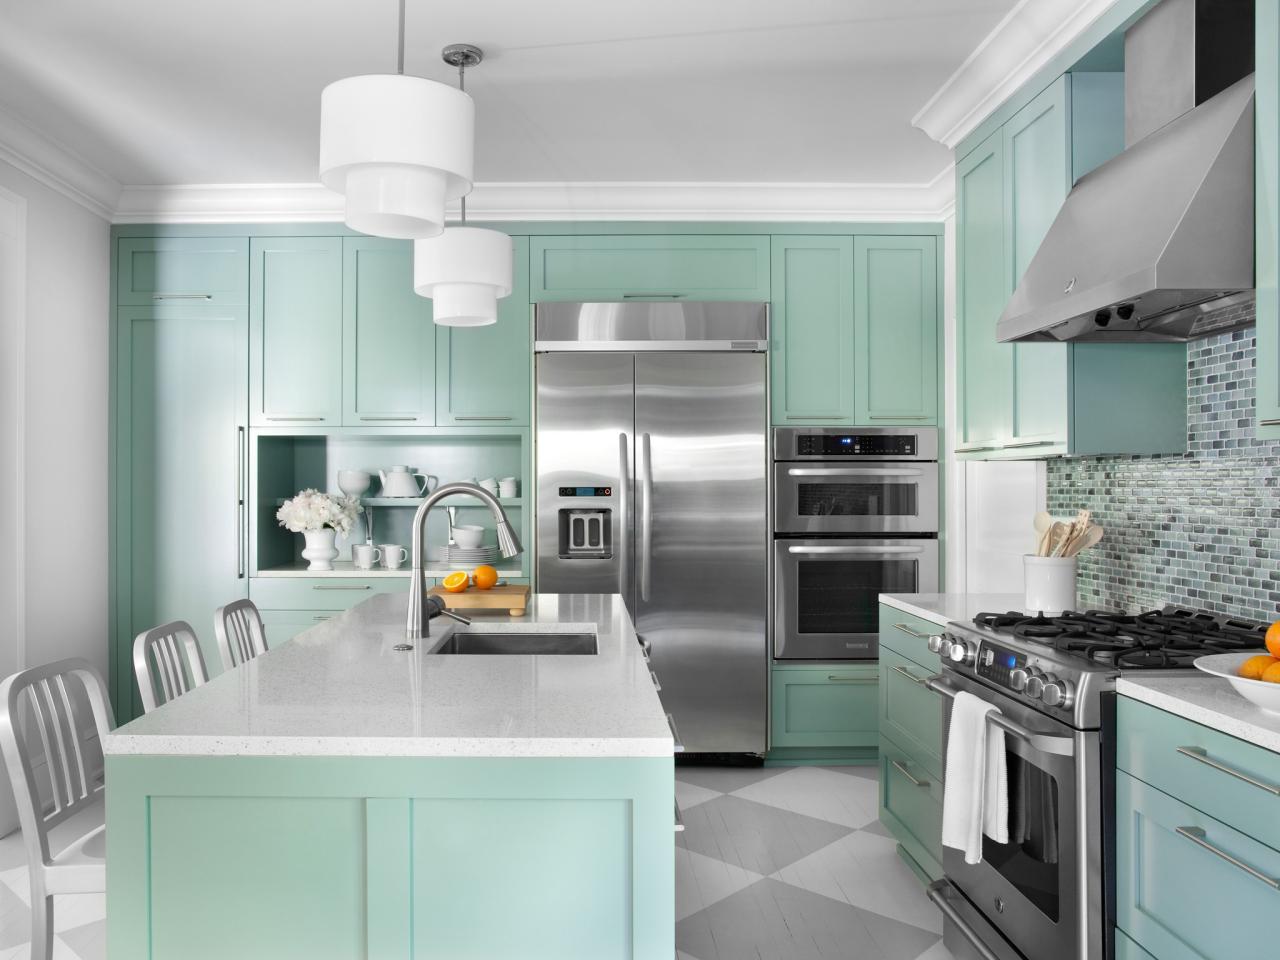 White Countertops With Turquoise Green Cabinets dwellingdecor